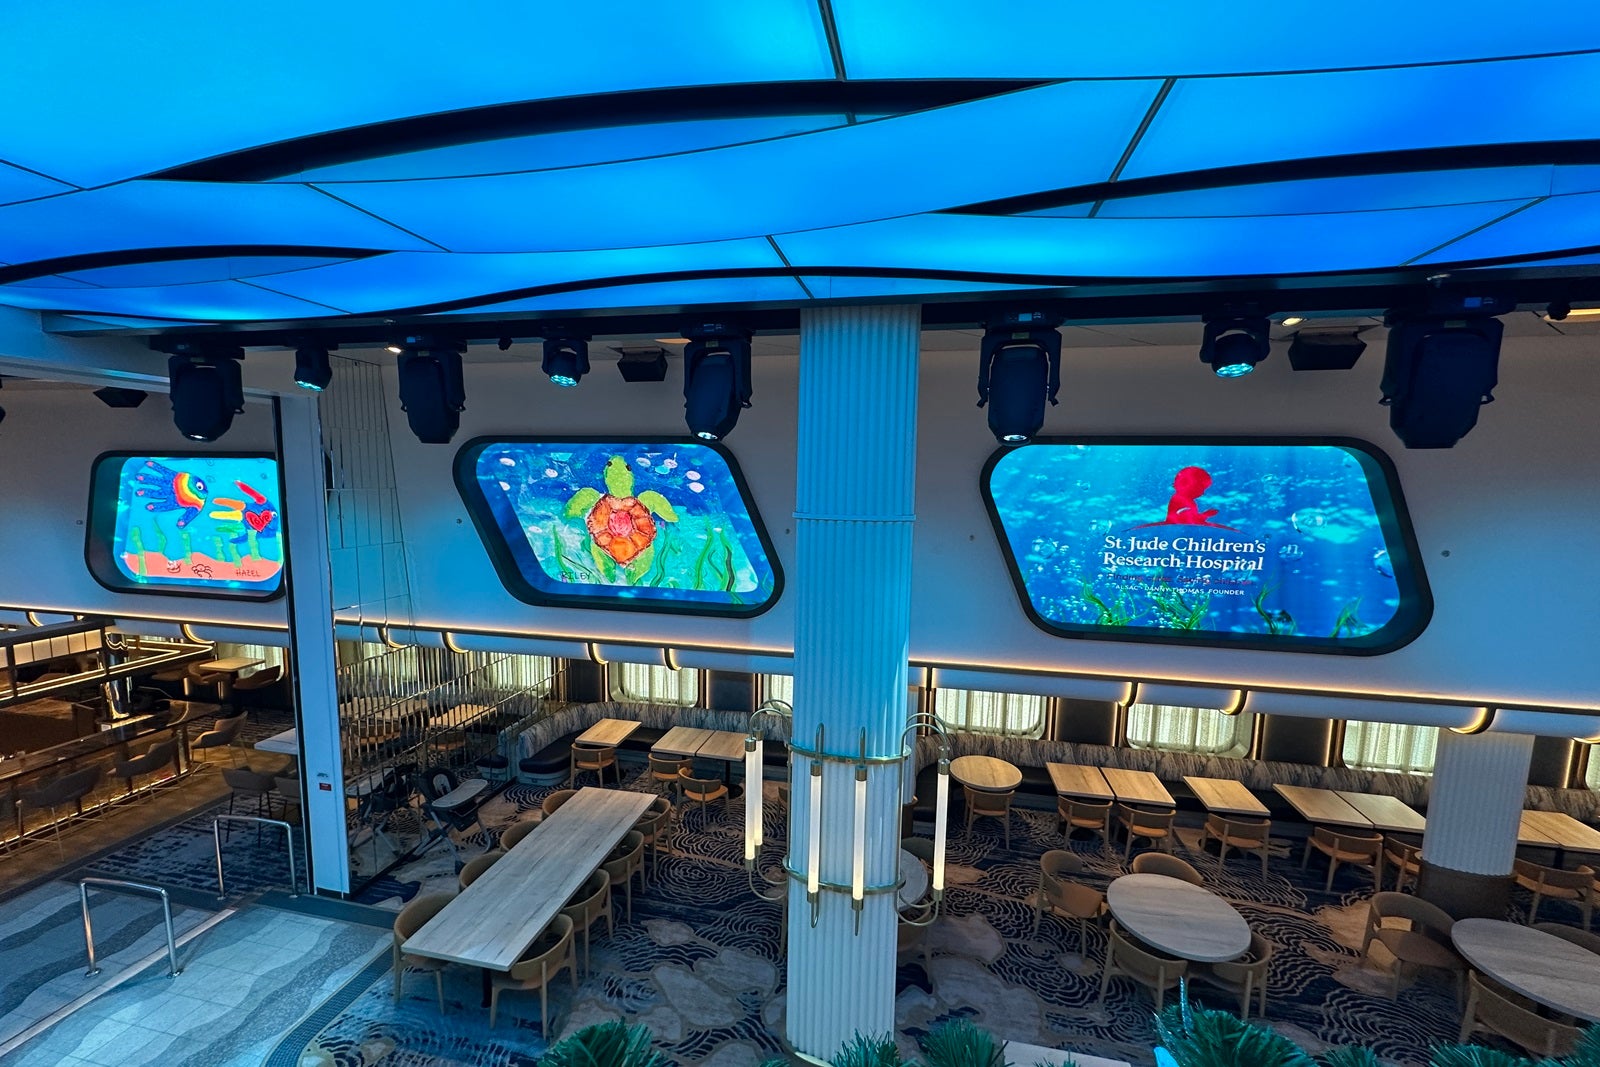 Two LED screens shaped like cruise ship windows show nautically themed children's drawings.